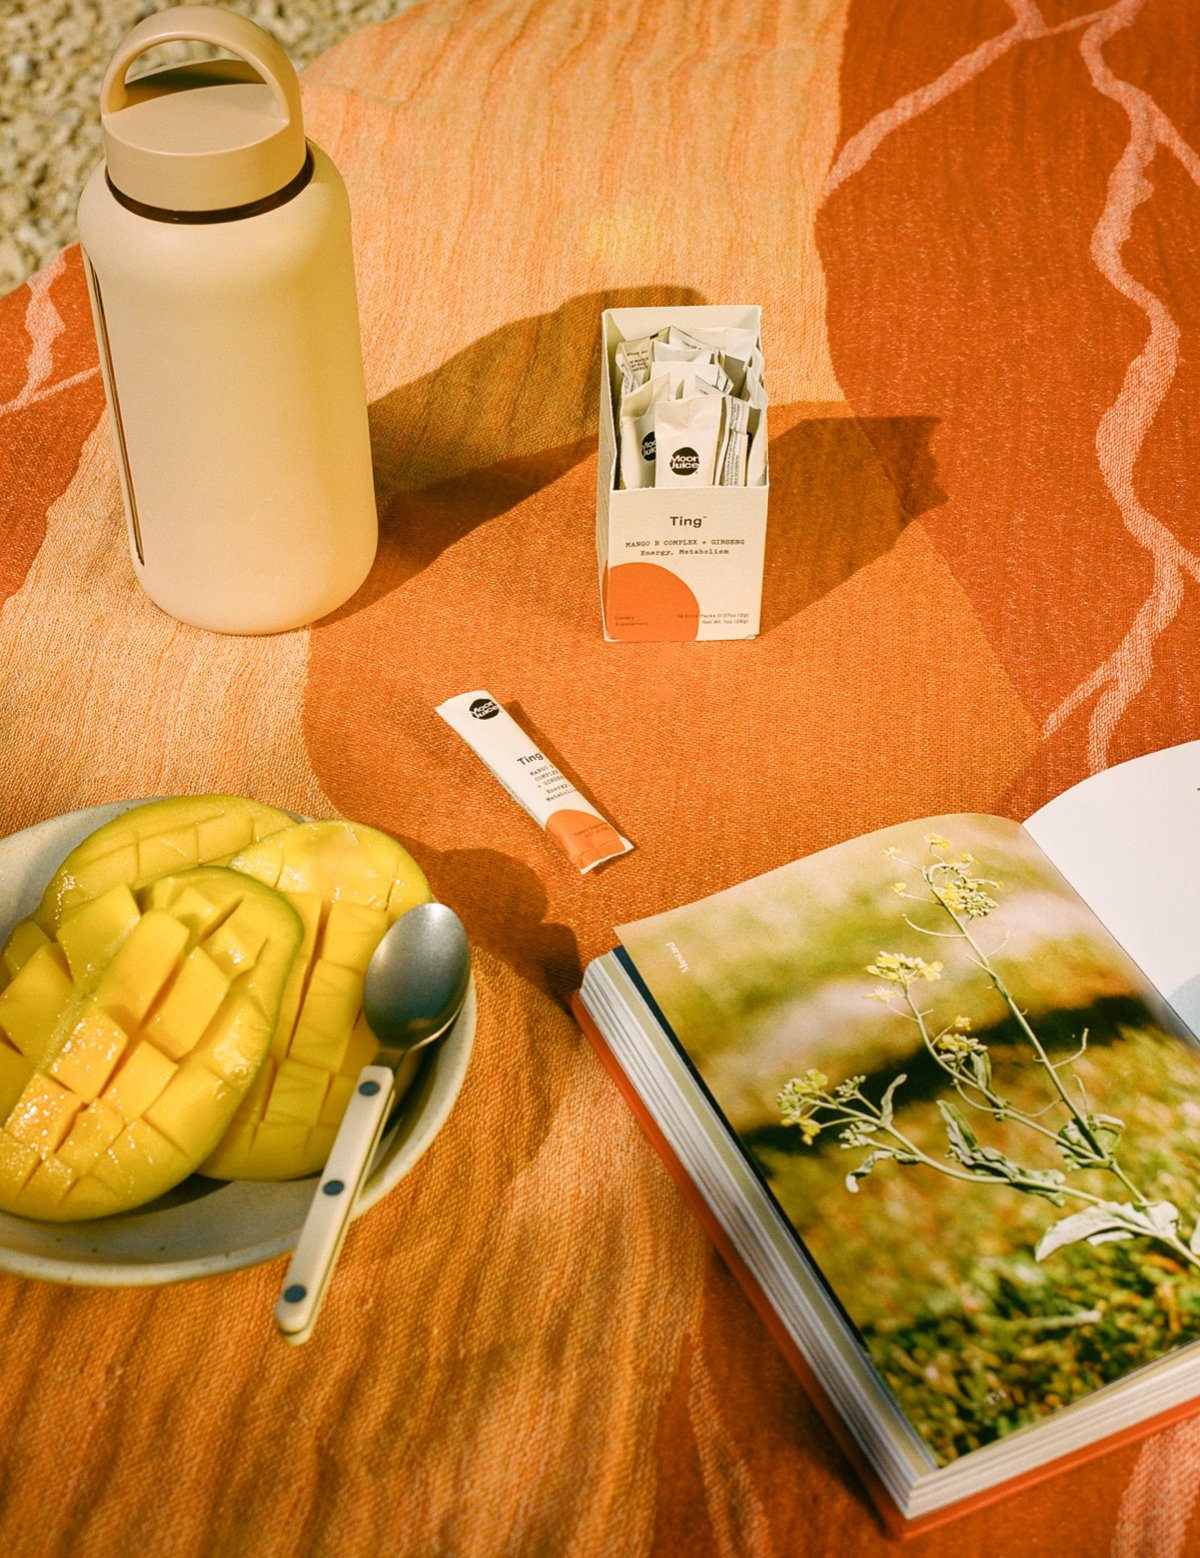 Ting packets on orange rug next to a plate of mango